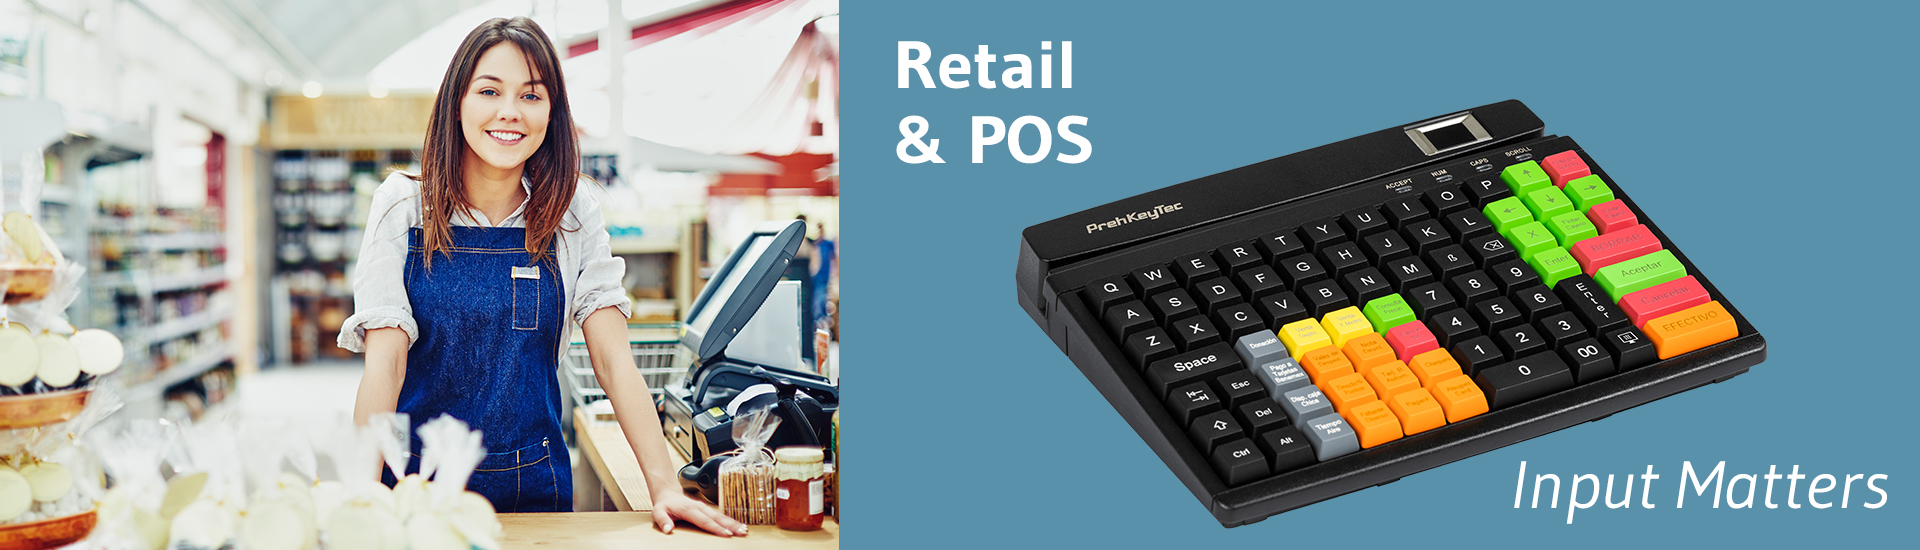 Data Input Solutions for Retail and POS